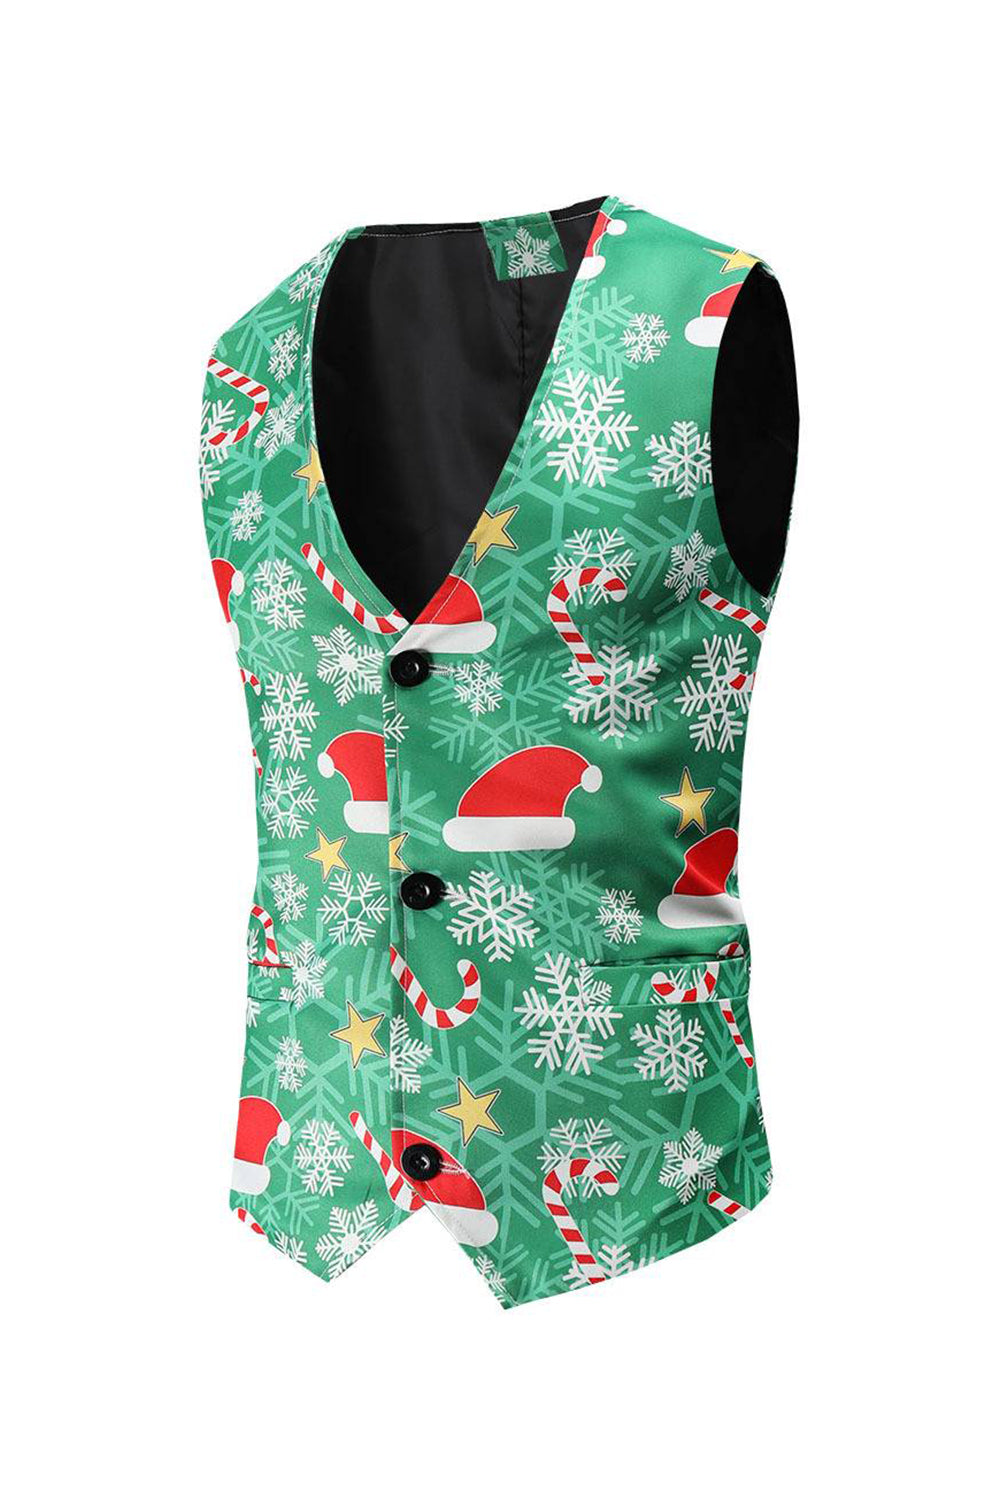 Green Printed Single Breasted Men's Christmas Suit Vest